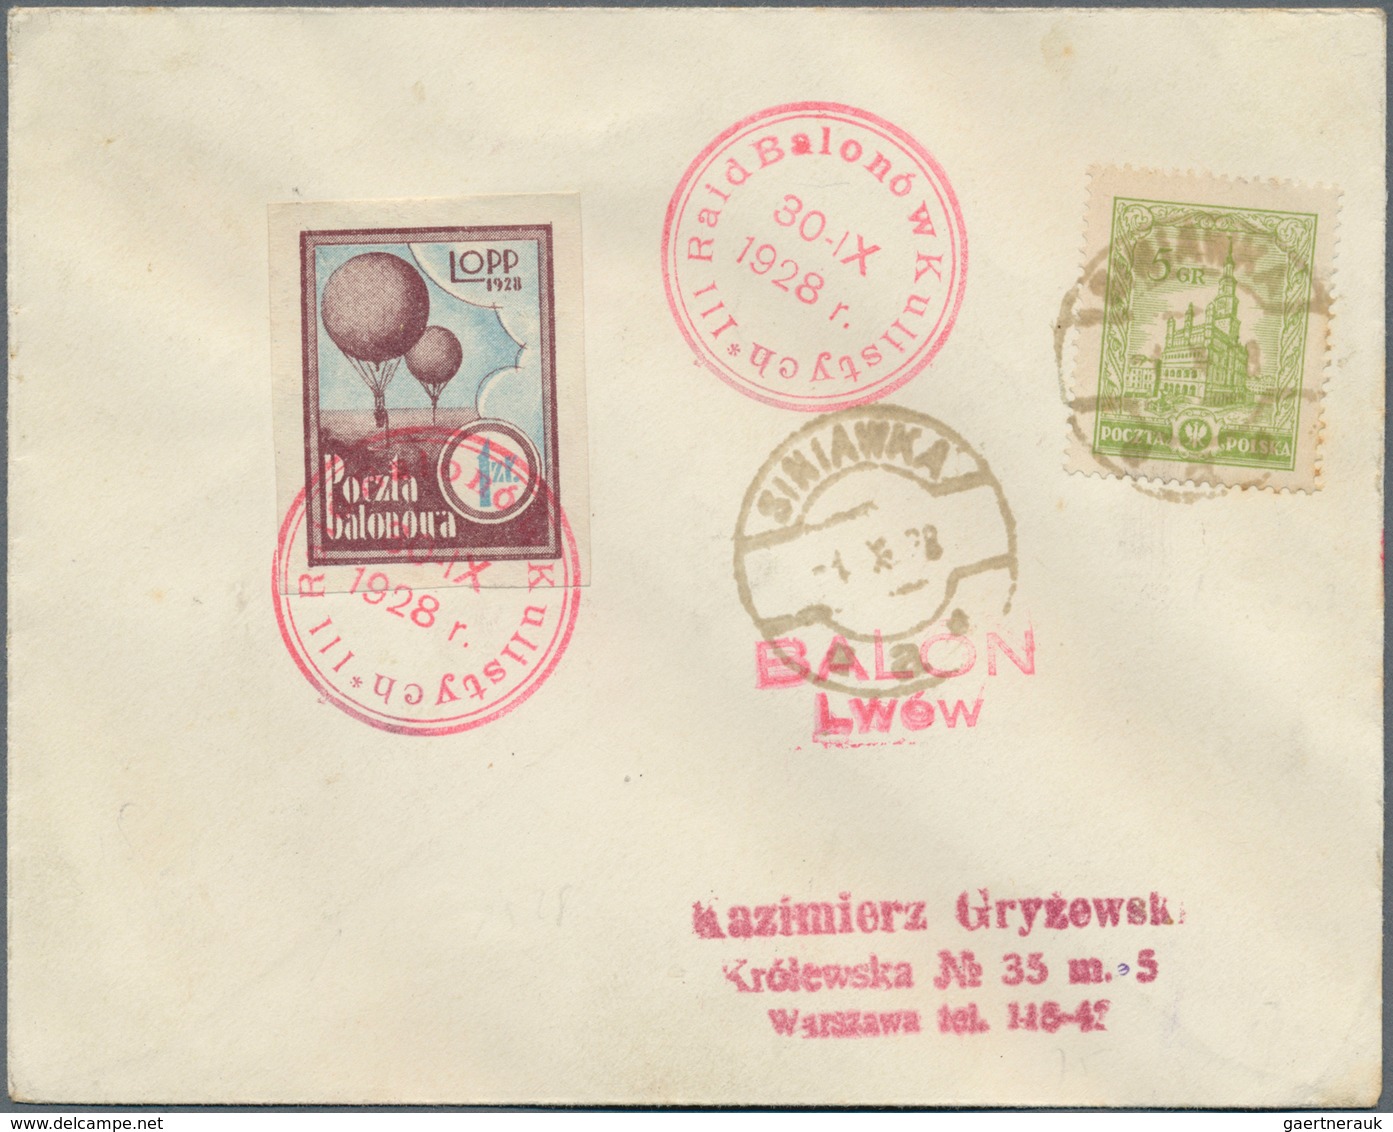 Ballonpost: 1928, 30.IX., Poland, Balloon "Lwów", Two Covers With Perforated And Imperforate Vignett - Montgolfières